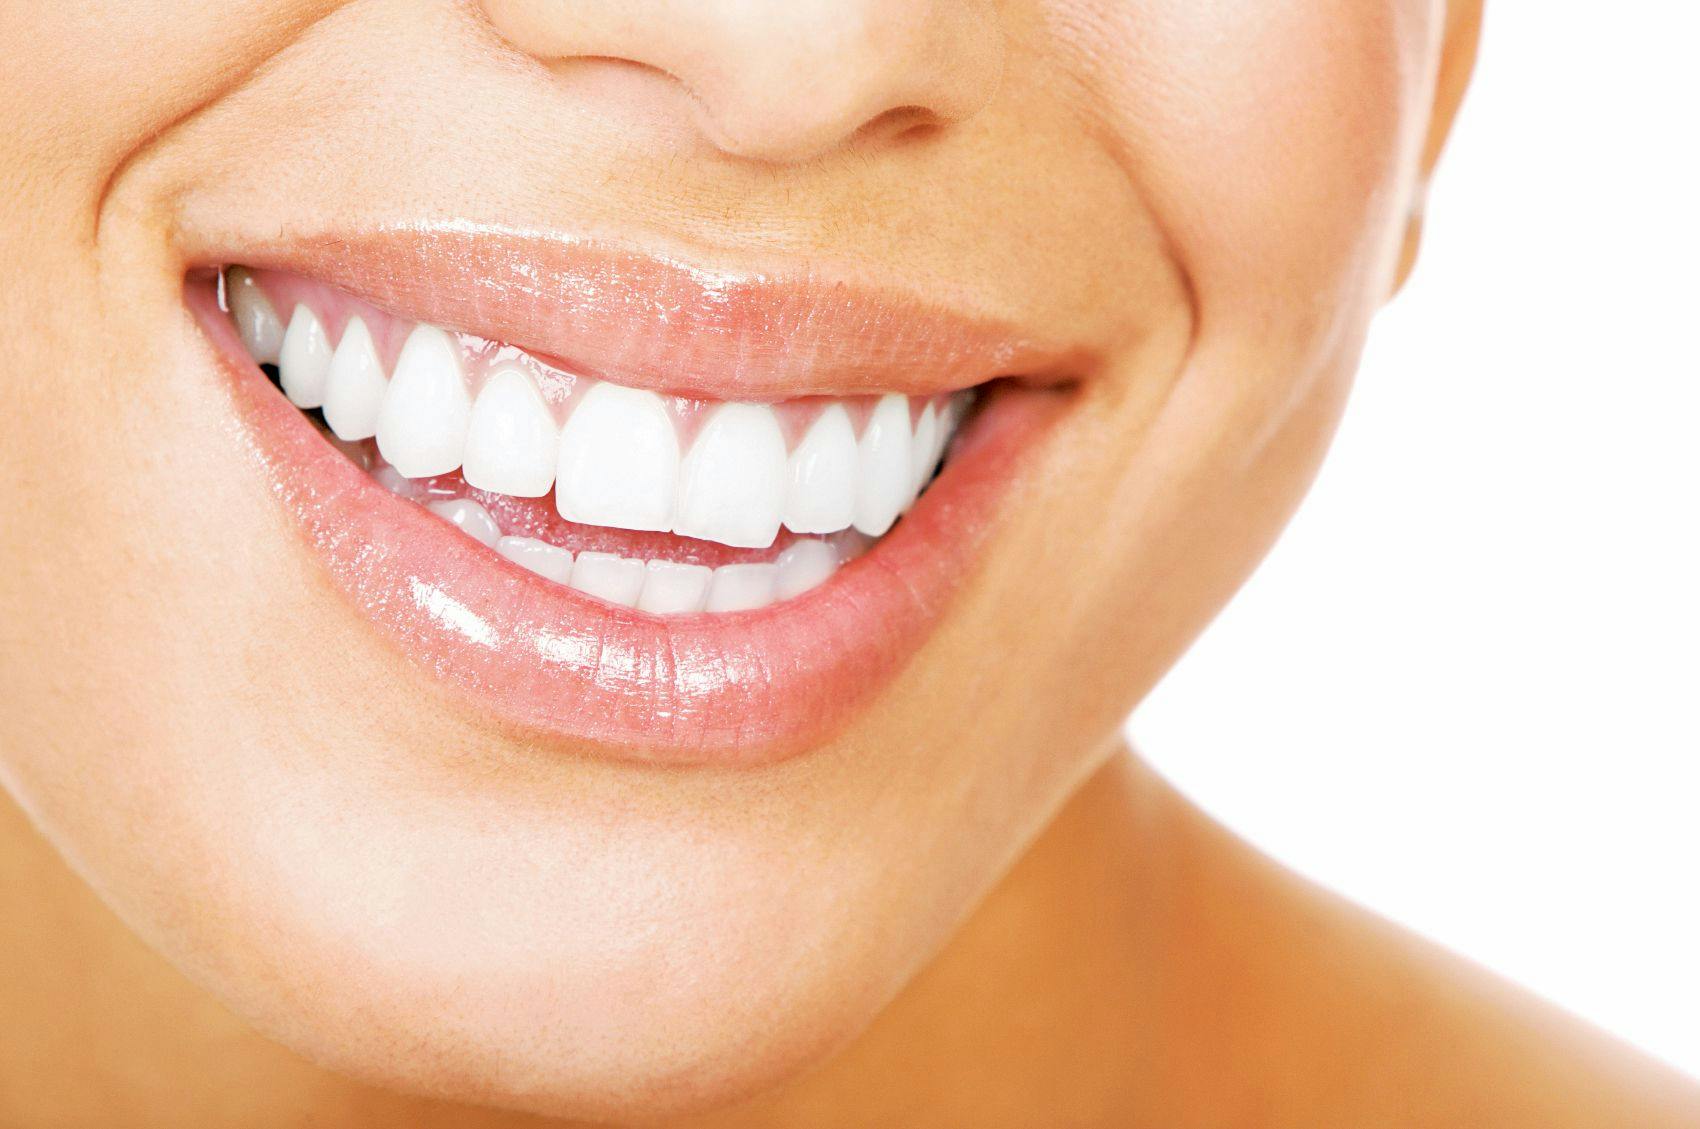 Oral Health and the Role of Dietary Supplements